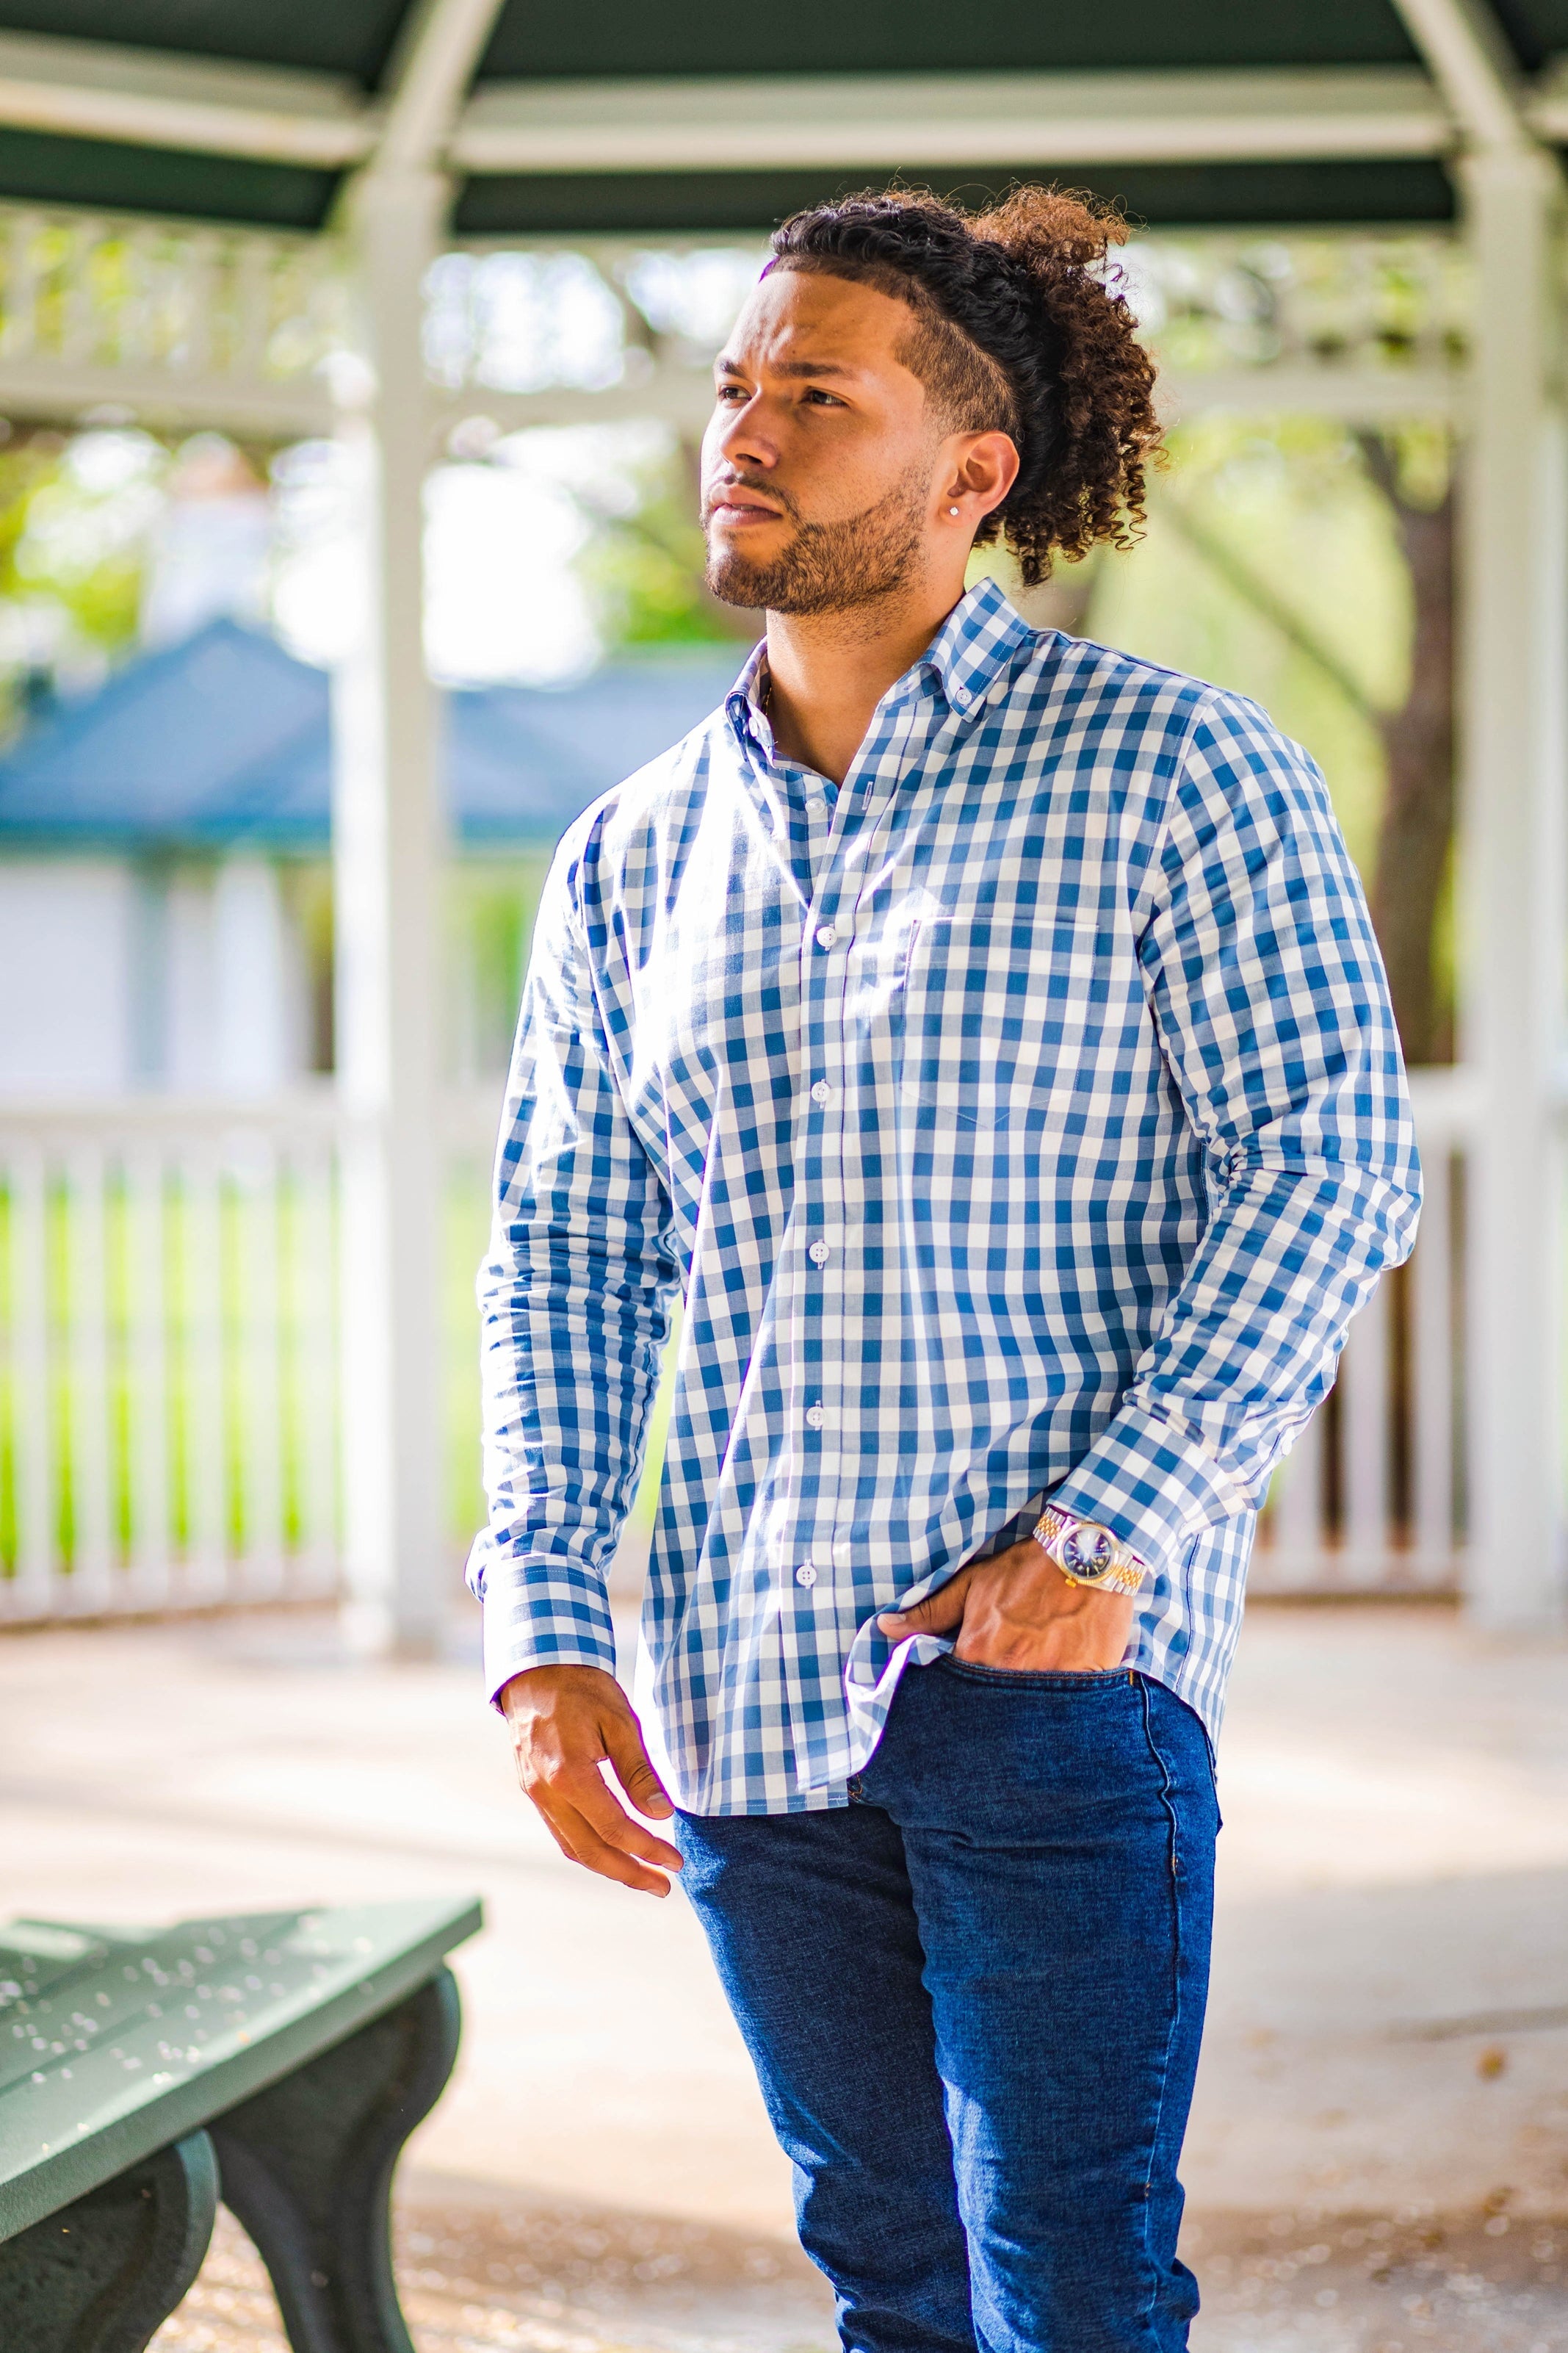 A man with curly hair is standing outdoors under a gazebo. He is wearing a blue and white checkered shirt and dark blue jeans, with his left hand in his pocket.